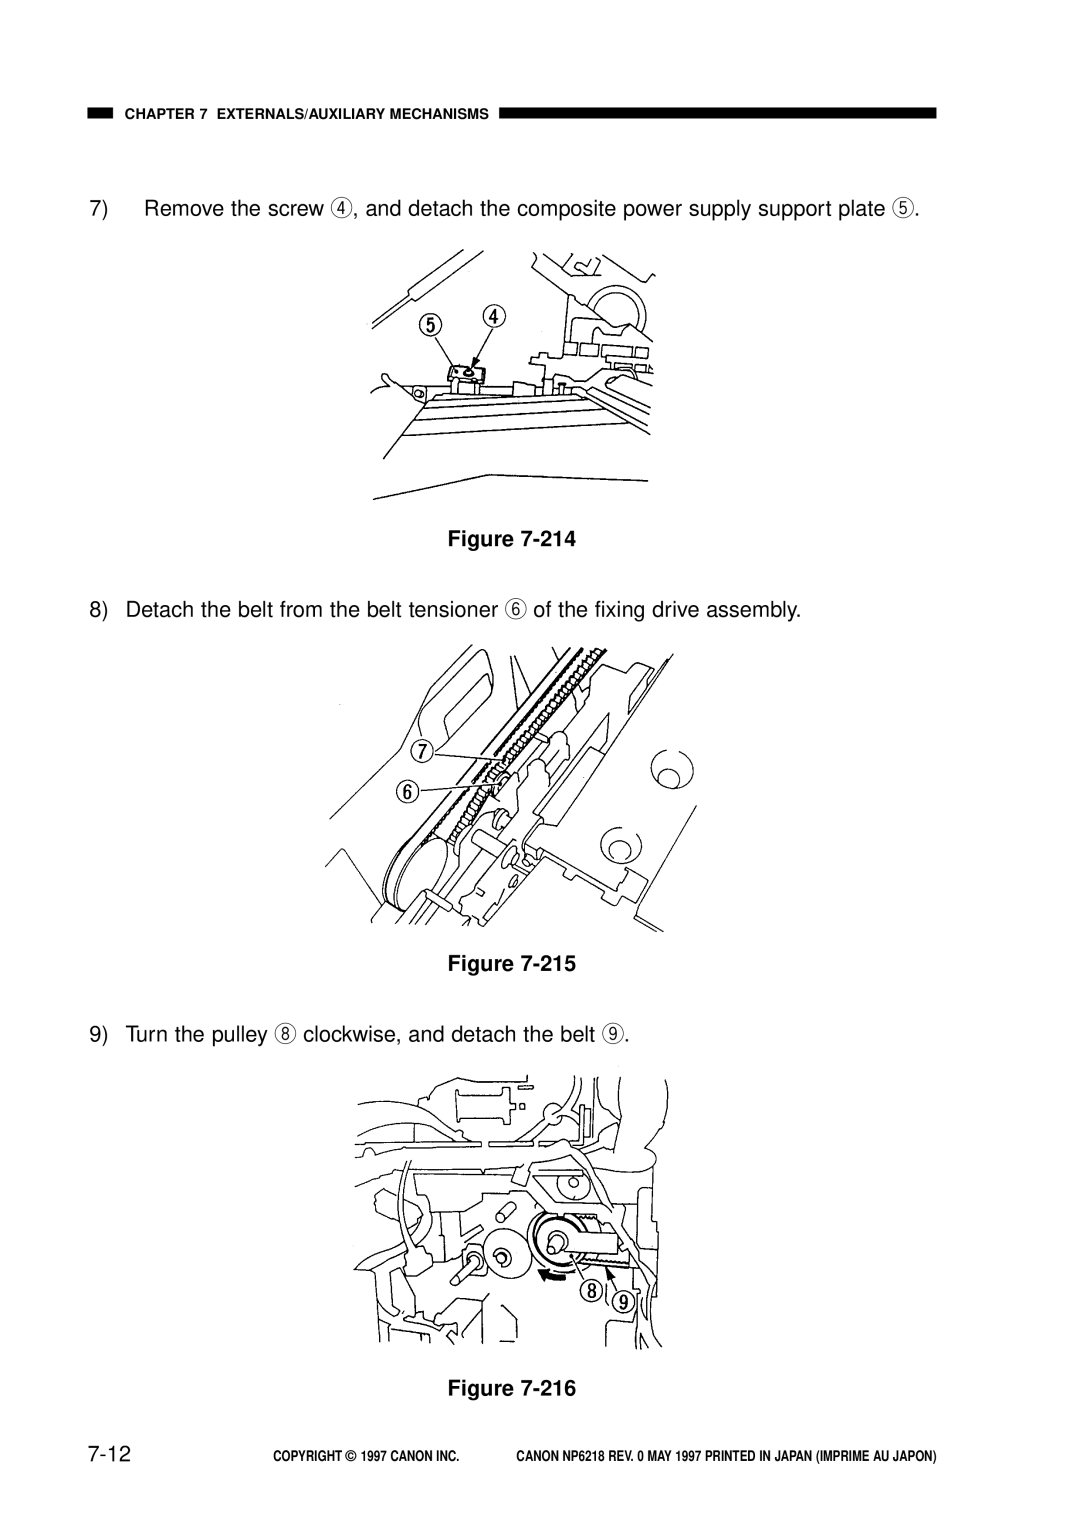 Canon FY8-13EX-000, NP6218 service manual 7-12, Turn the pulley i clockwise, and detach the belt o 